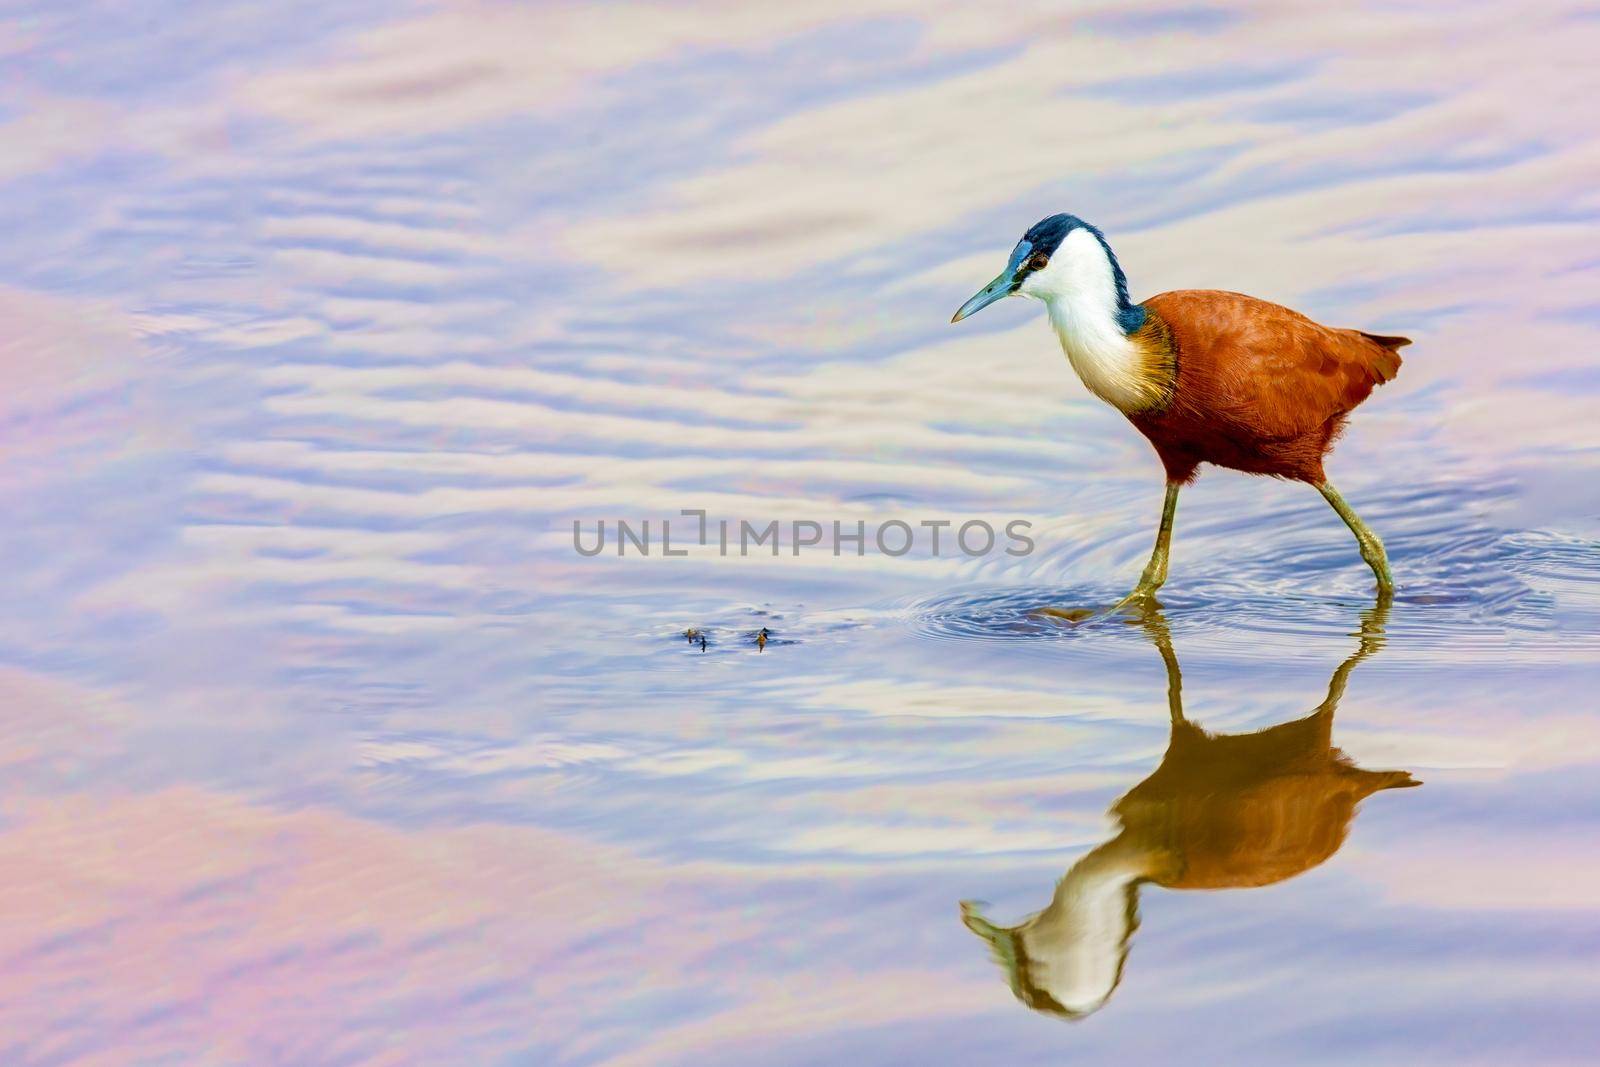 A small bird on long legs walks through the water and hunts for fish. Kenya, a national park. Wild nature.